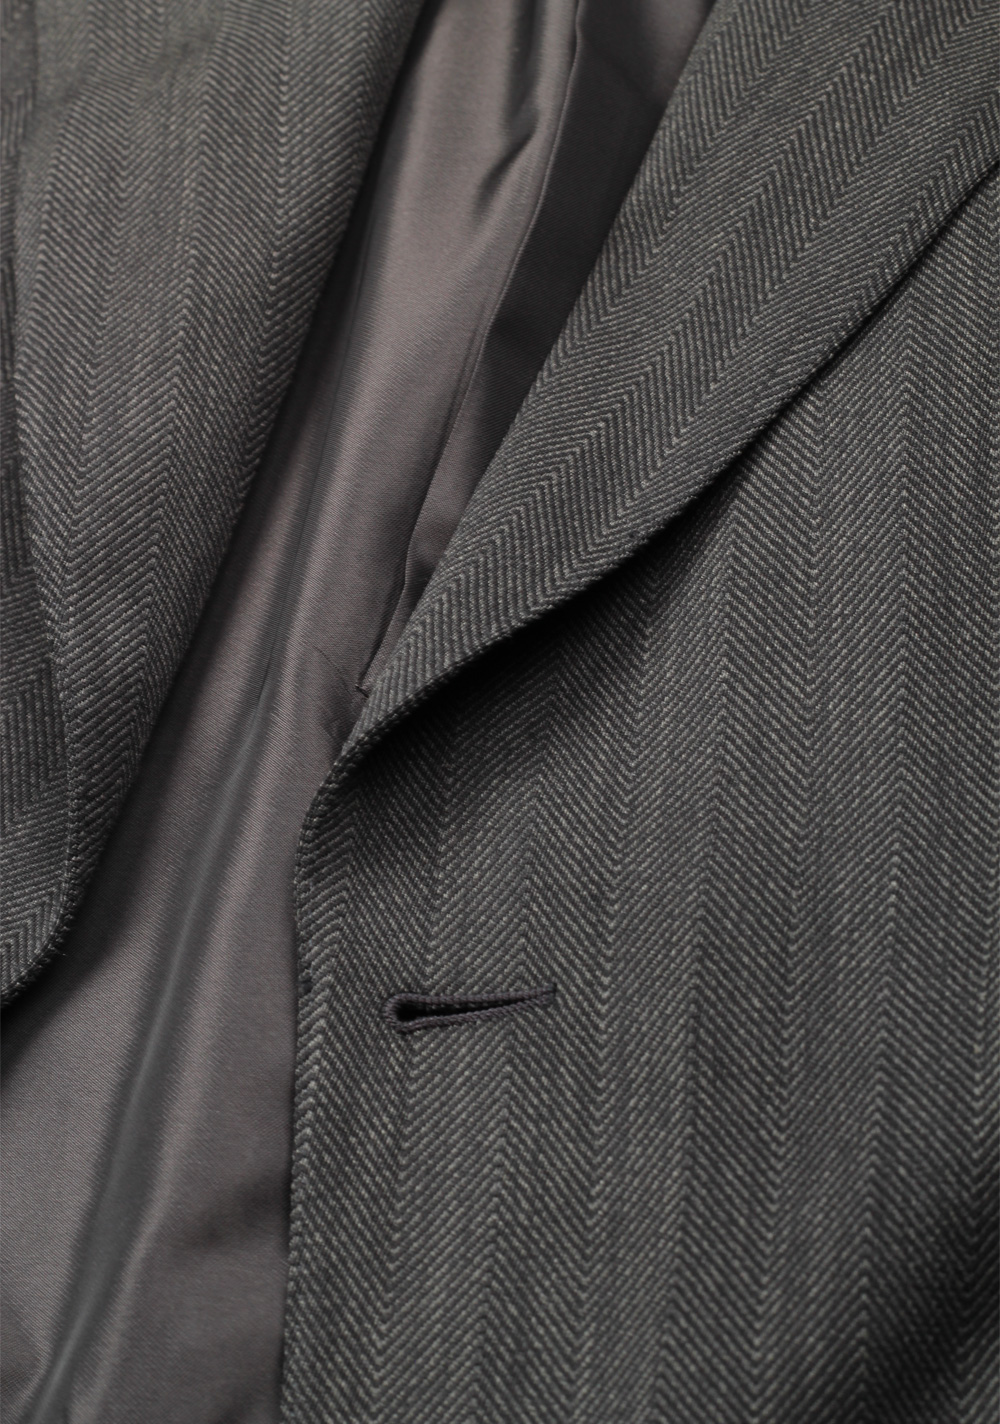 TOM FORD Shelton Gray Suit Size 48 / 38R U.S. In Wool | Costume Limité